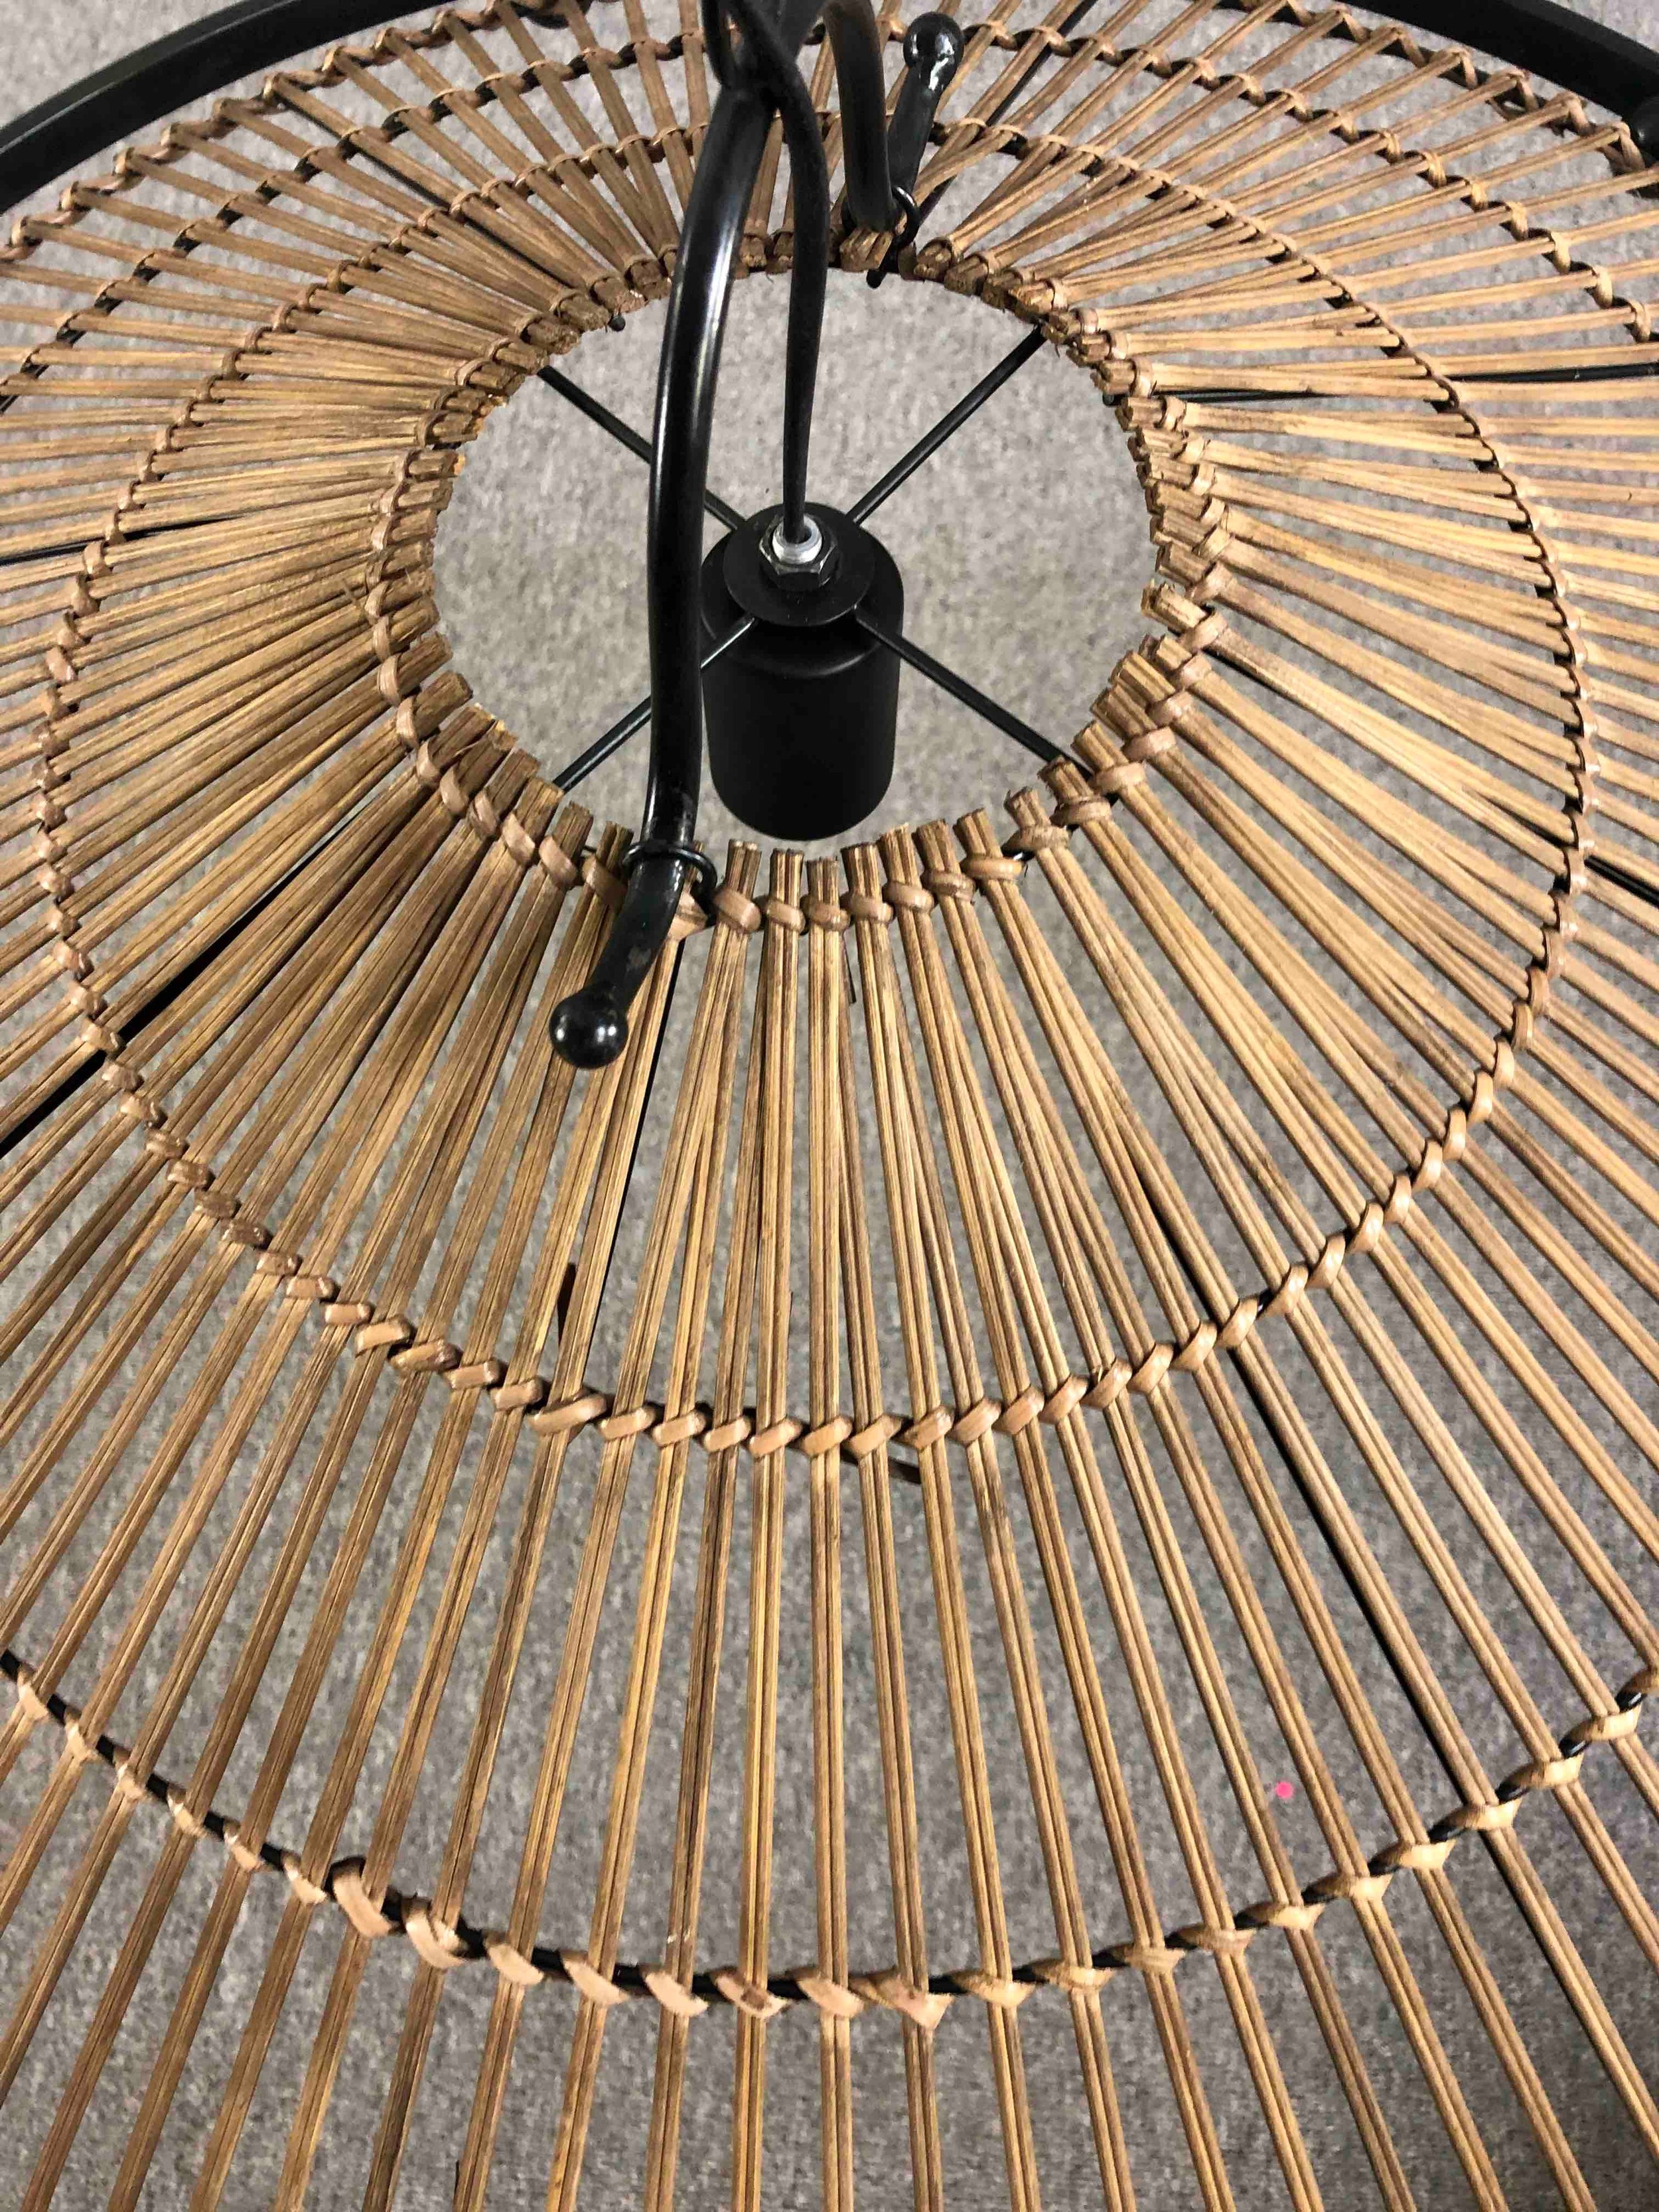 Kindred Lighting. The Mambo natural rattan ceiling pendant. Rattan with a metal surround and - Image 4 of 4